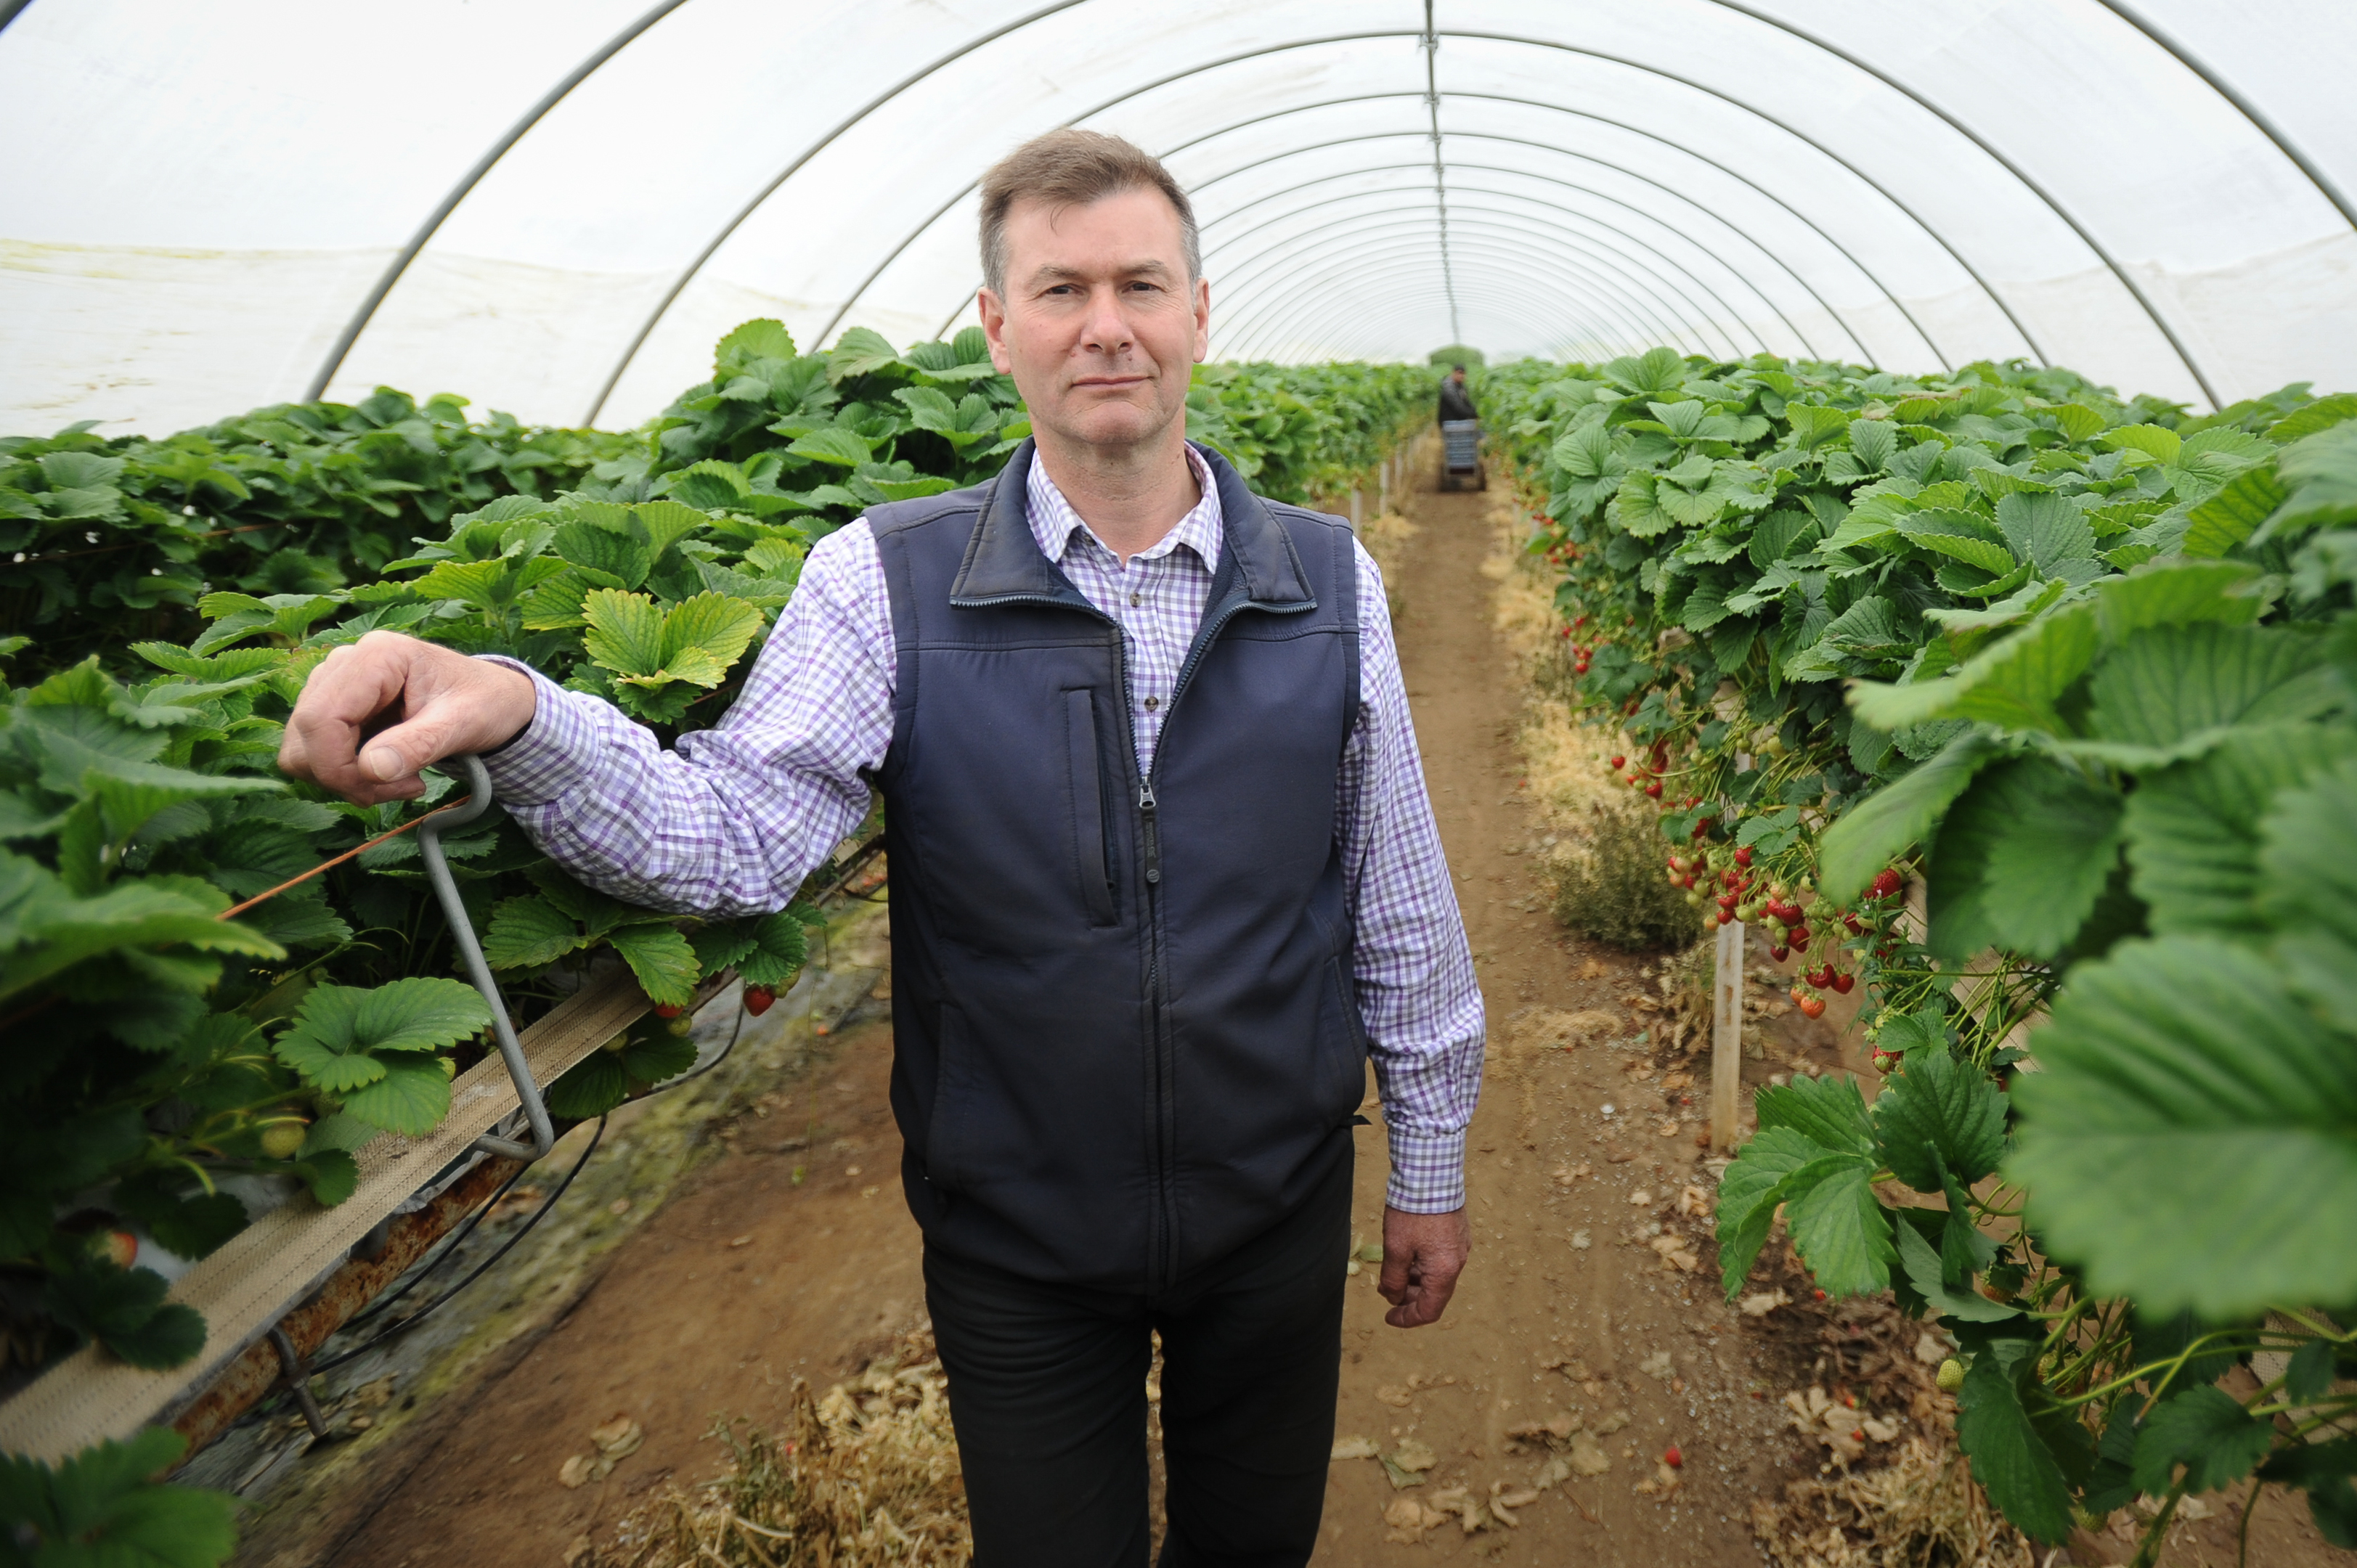 Tim Stockwell, of Barnsmuir Farm, is struggling with labour shortages for fruit-picking. He's been over to Bulgaria to drum up recruits, but still faces a 10% shortfall.  Picture shows Tim Stockwell in one of the polytunnels where his strawberries are grown.